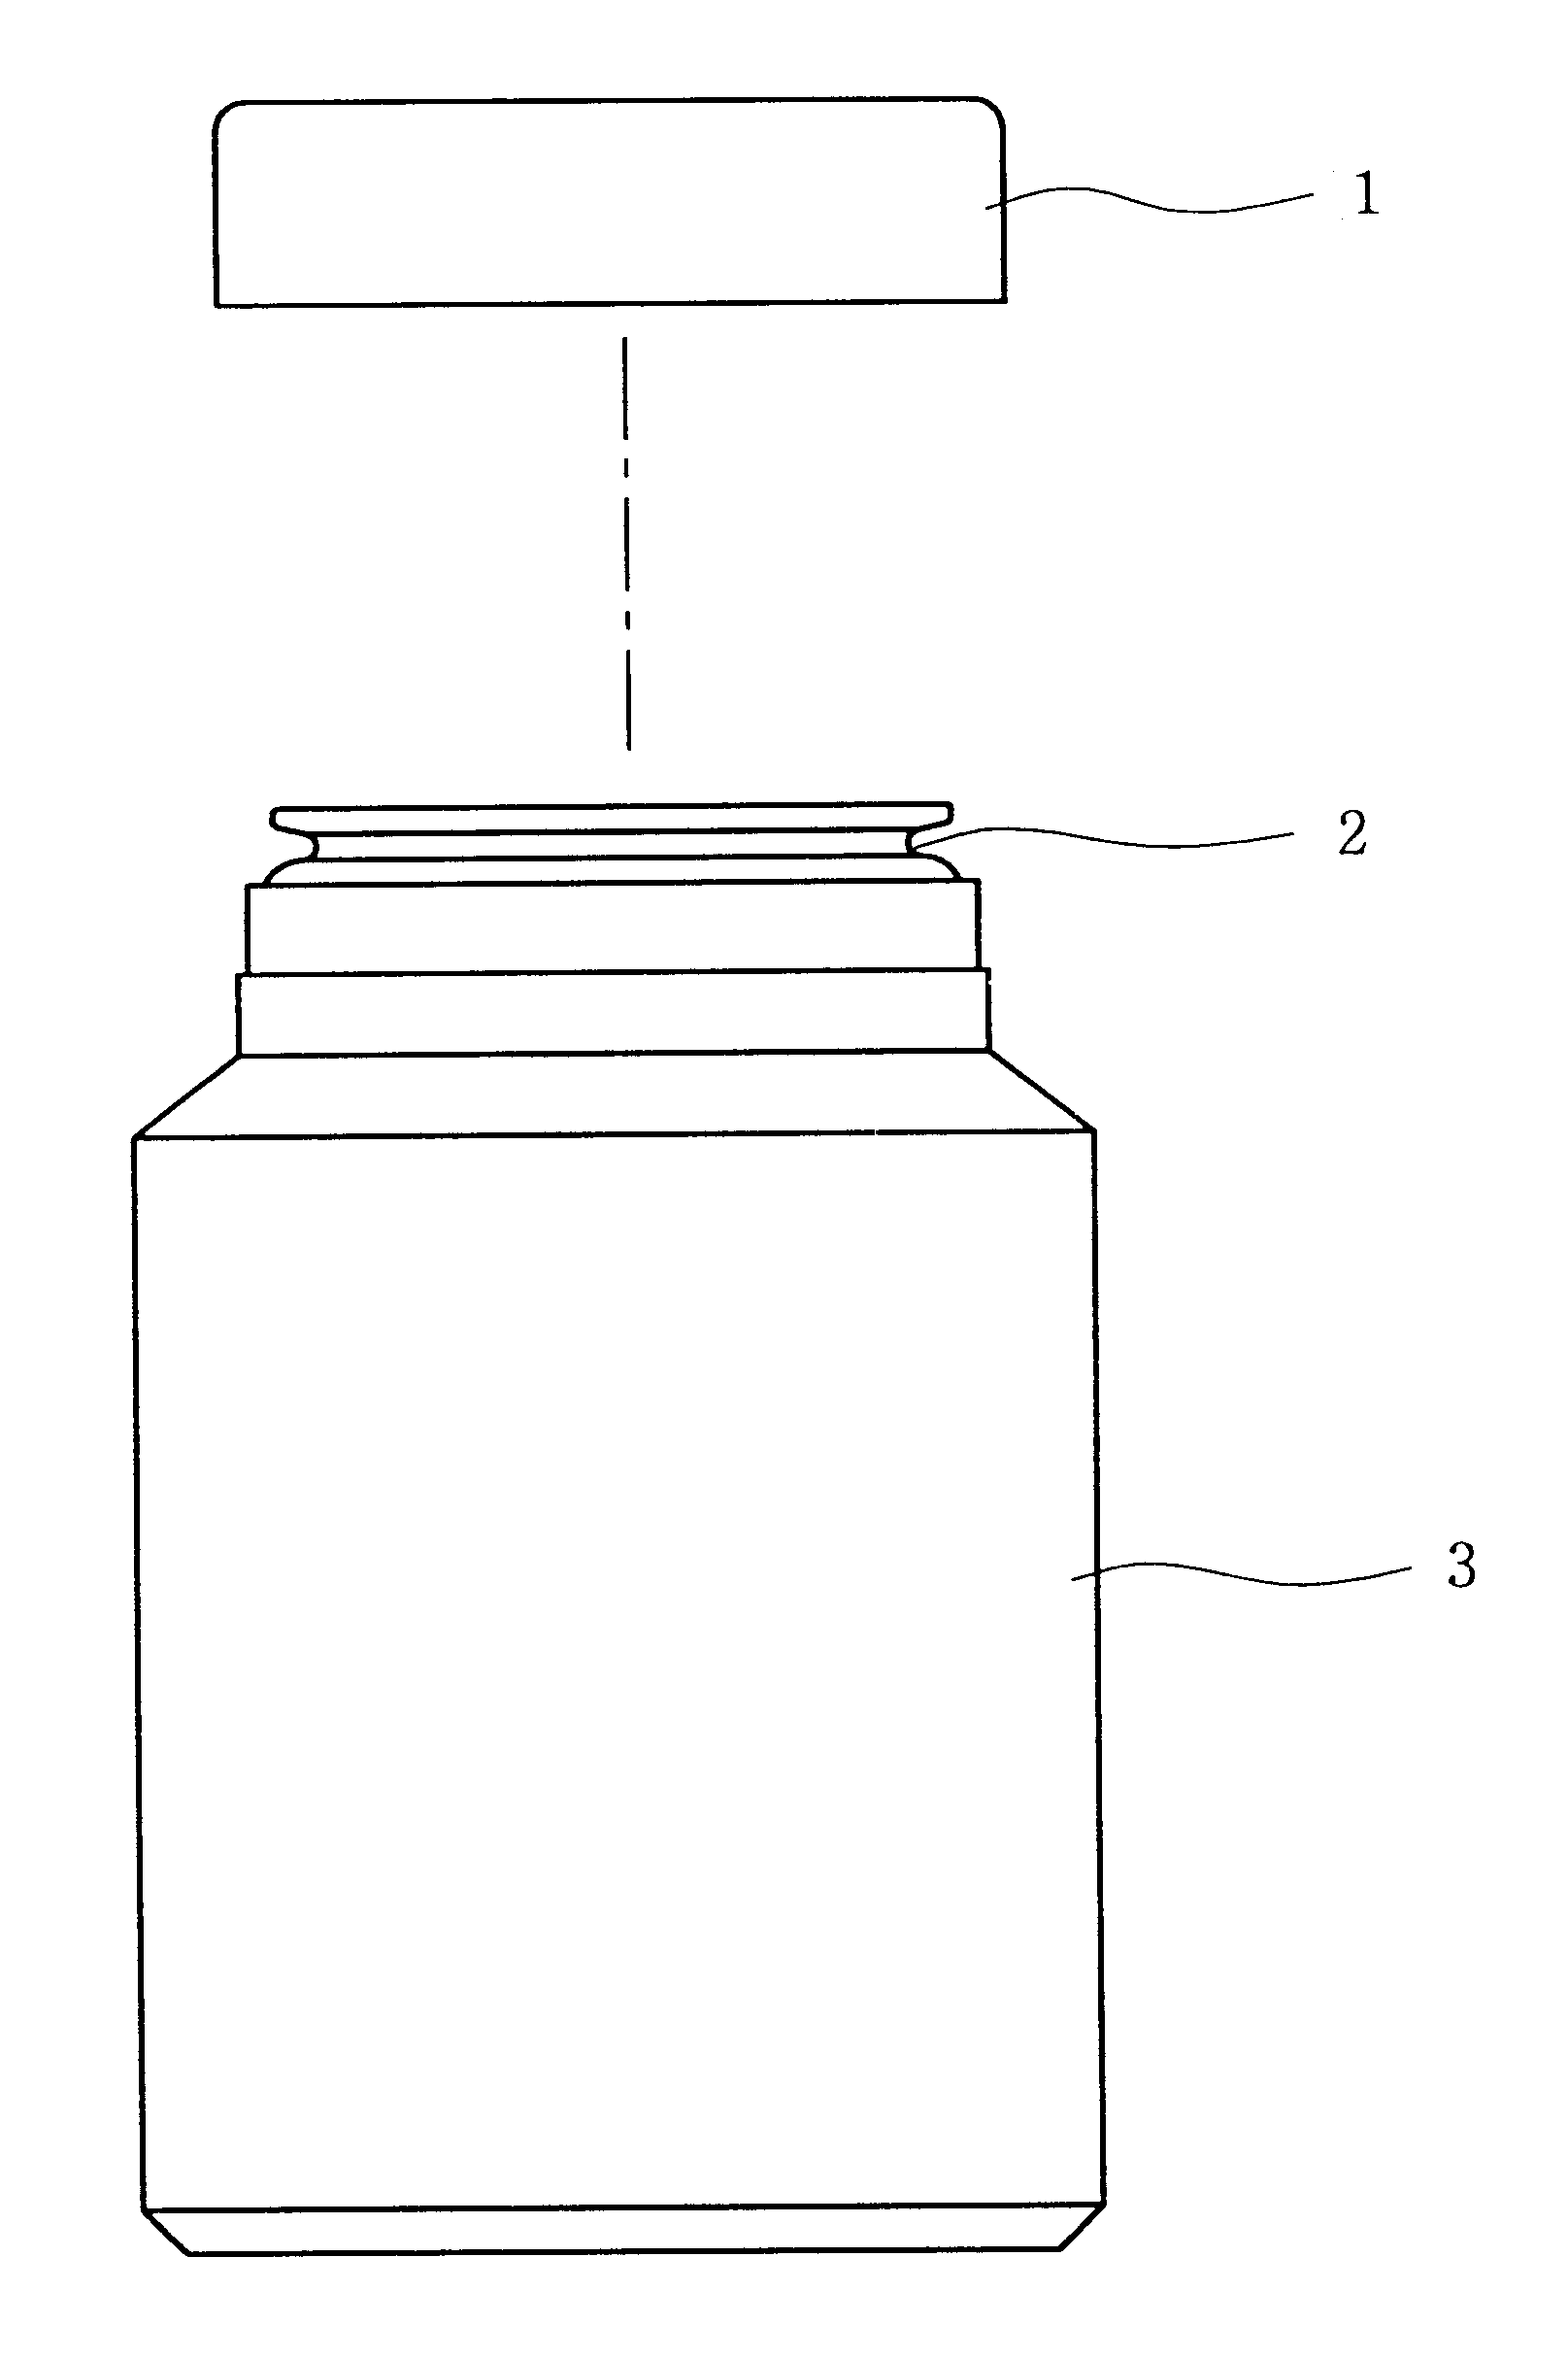 Biodegradable plastic container having a moisture permeability